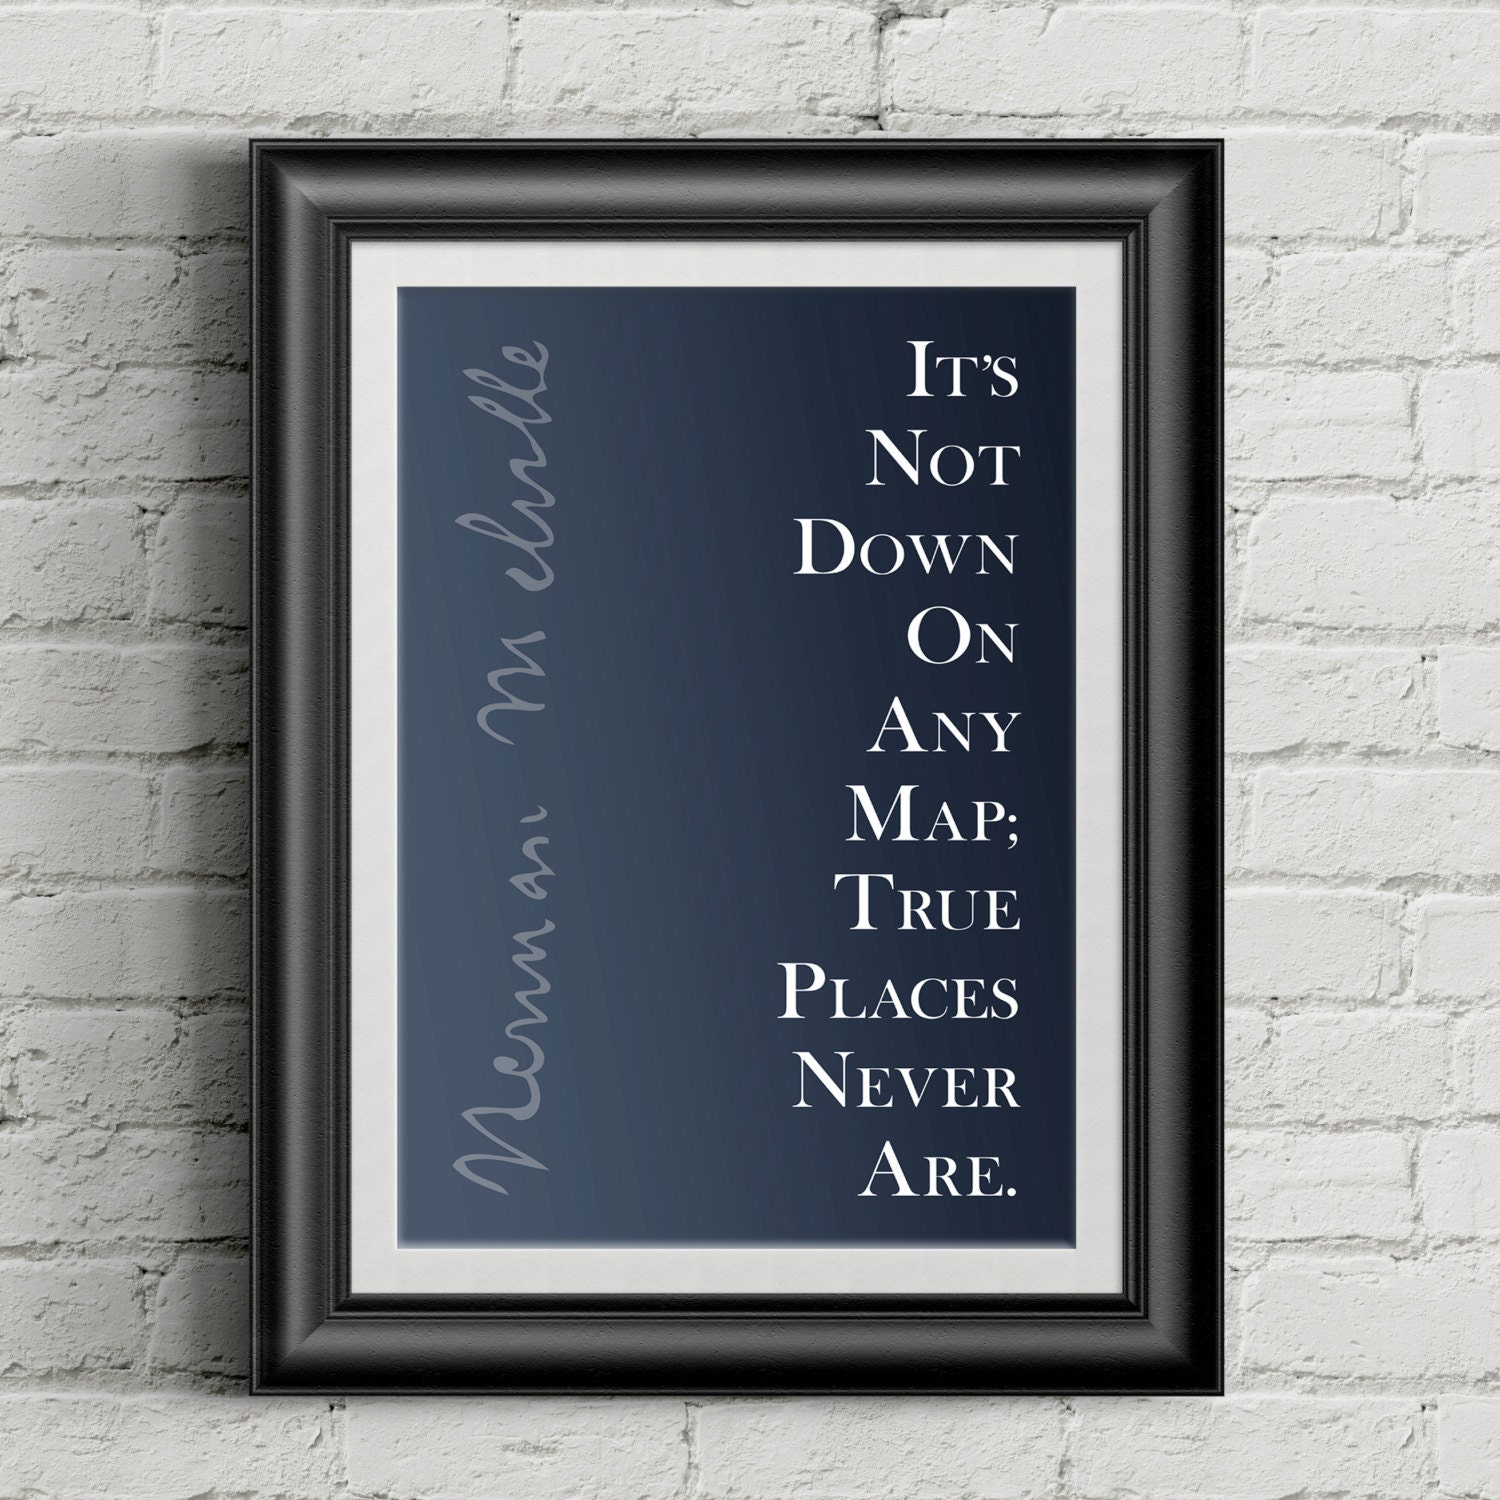 Herman Melville Moby Dick Quote Poster It's Not Down on